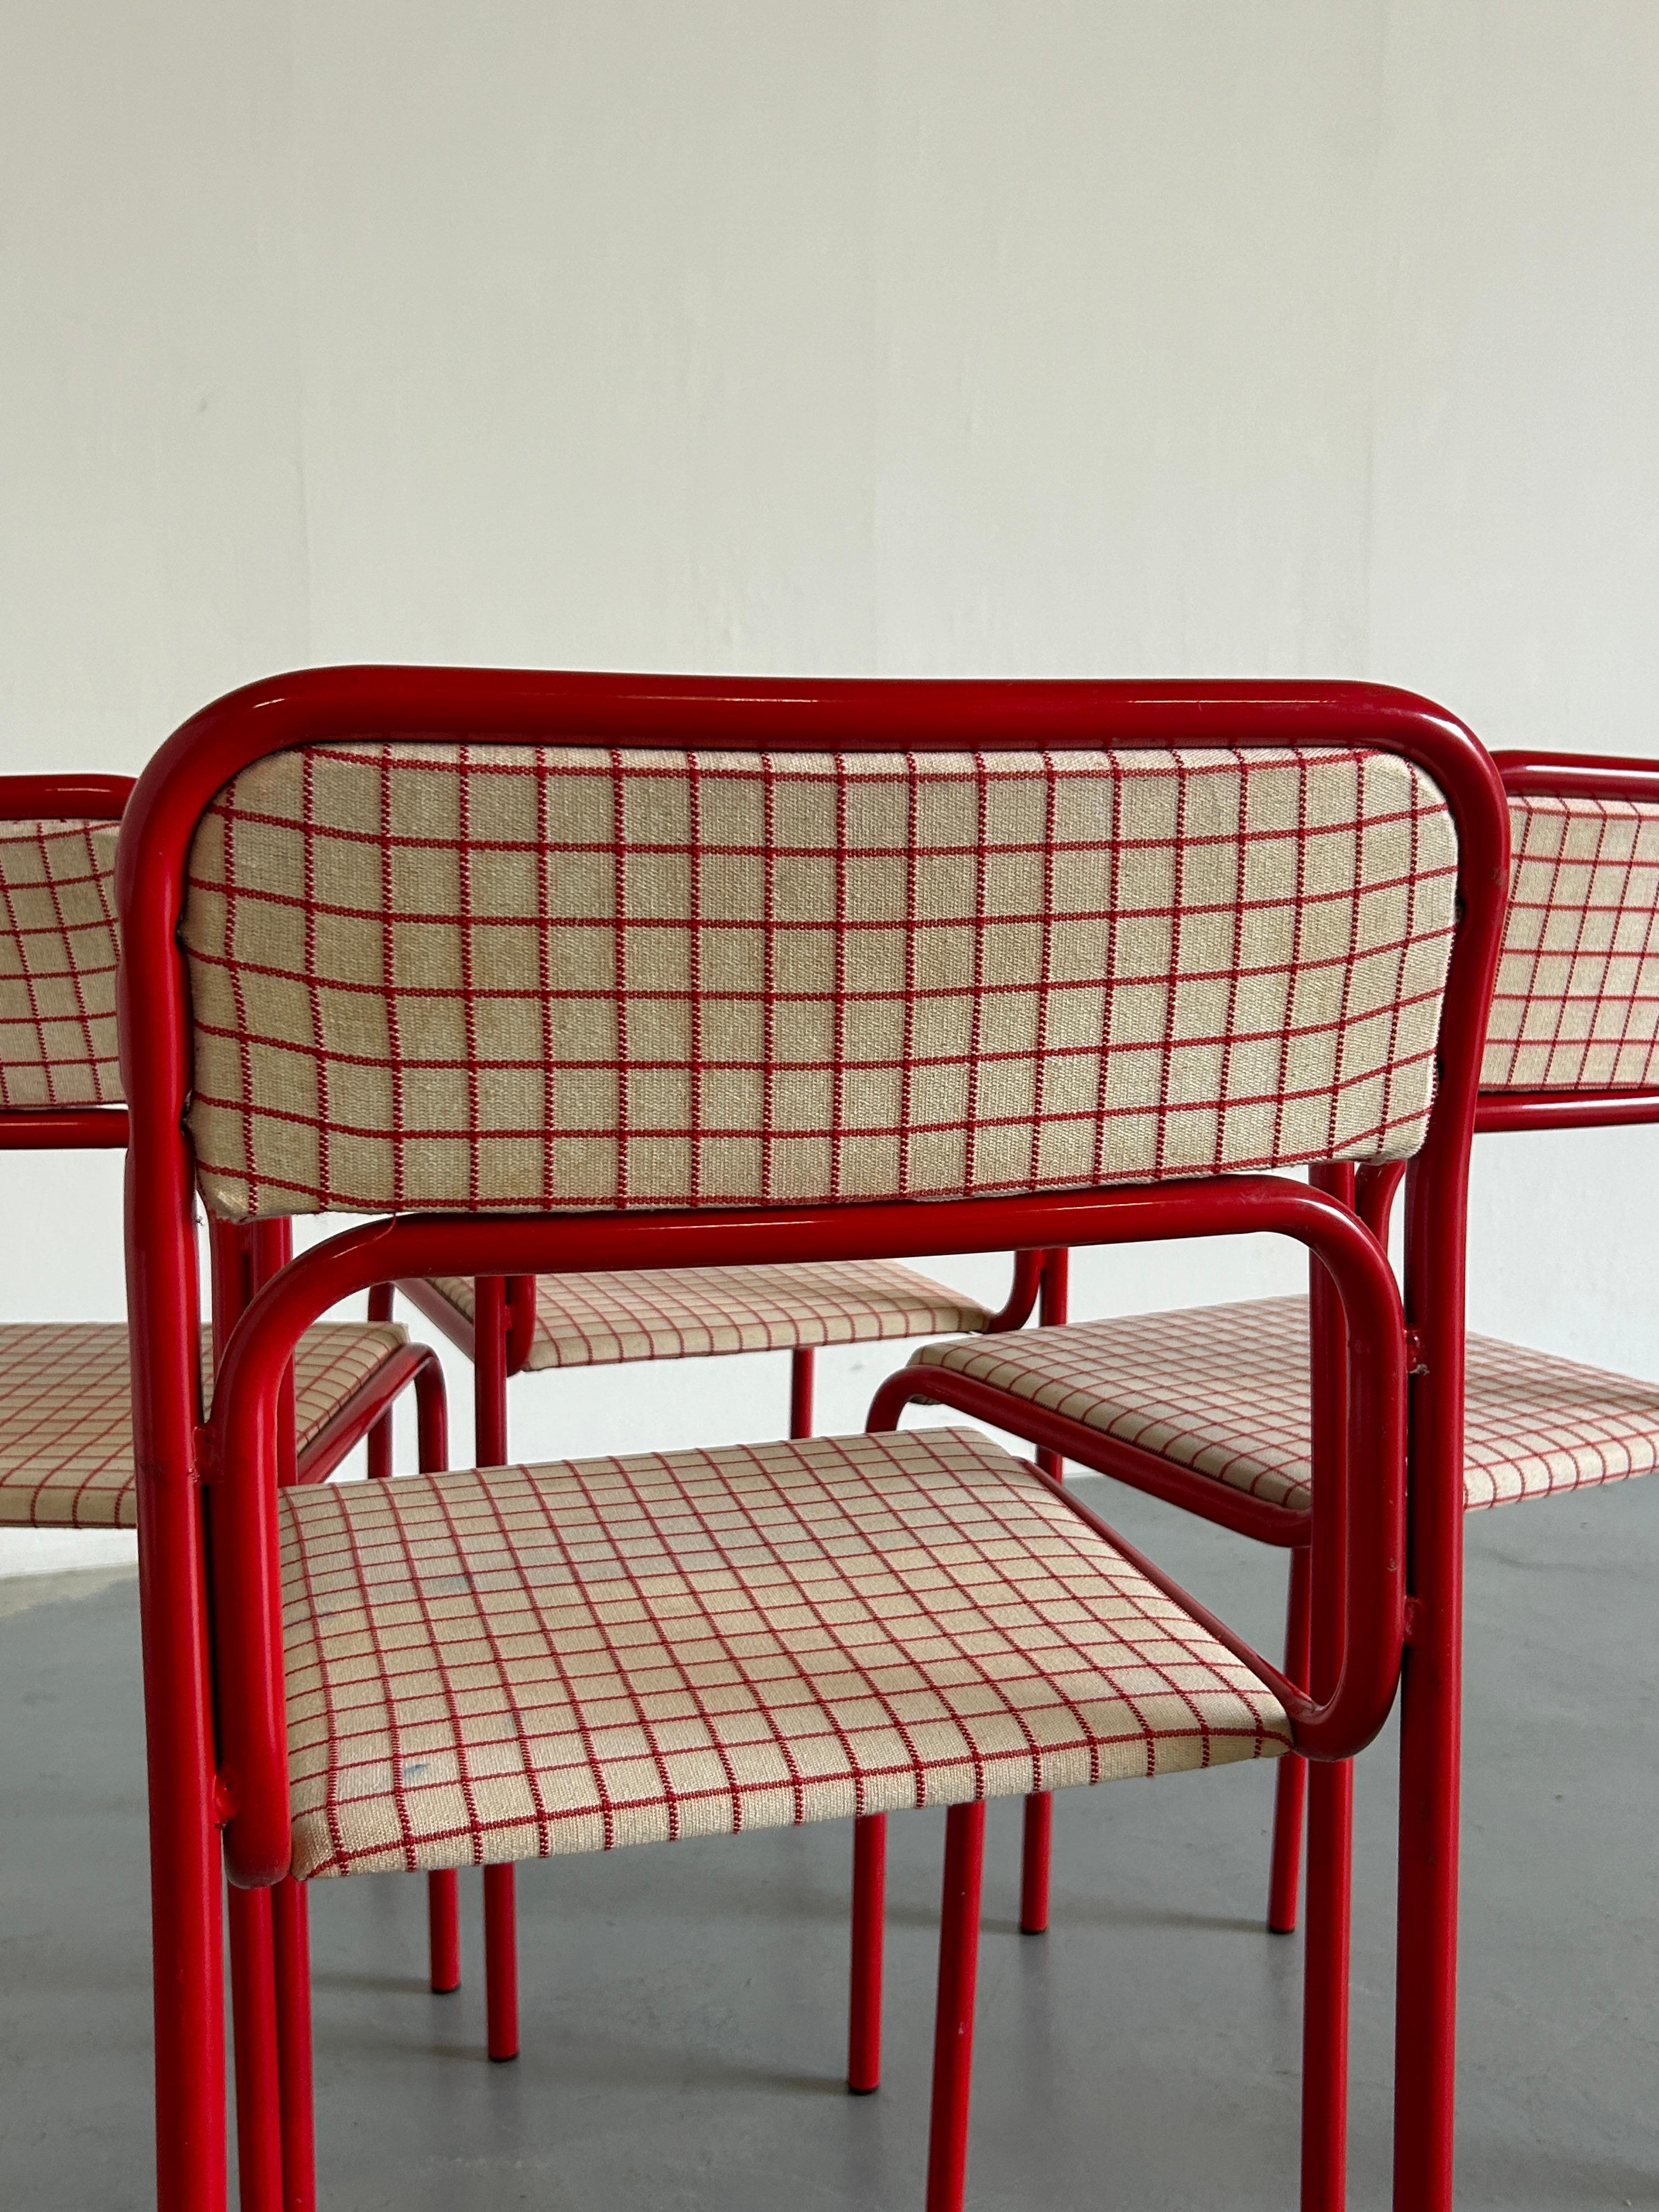 Set of 4 Pop-Art Syle Tubular Steel Checkered Red Upholstery Chairs, 80s Italy 5